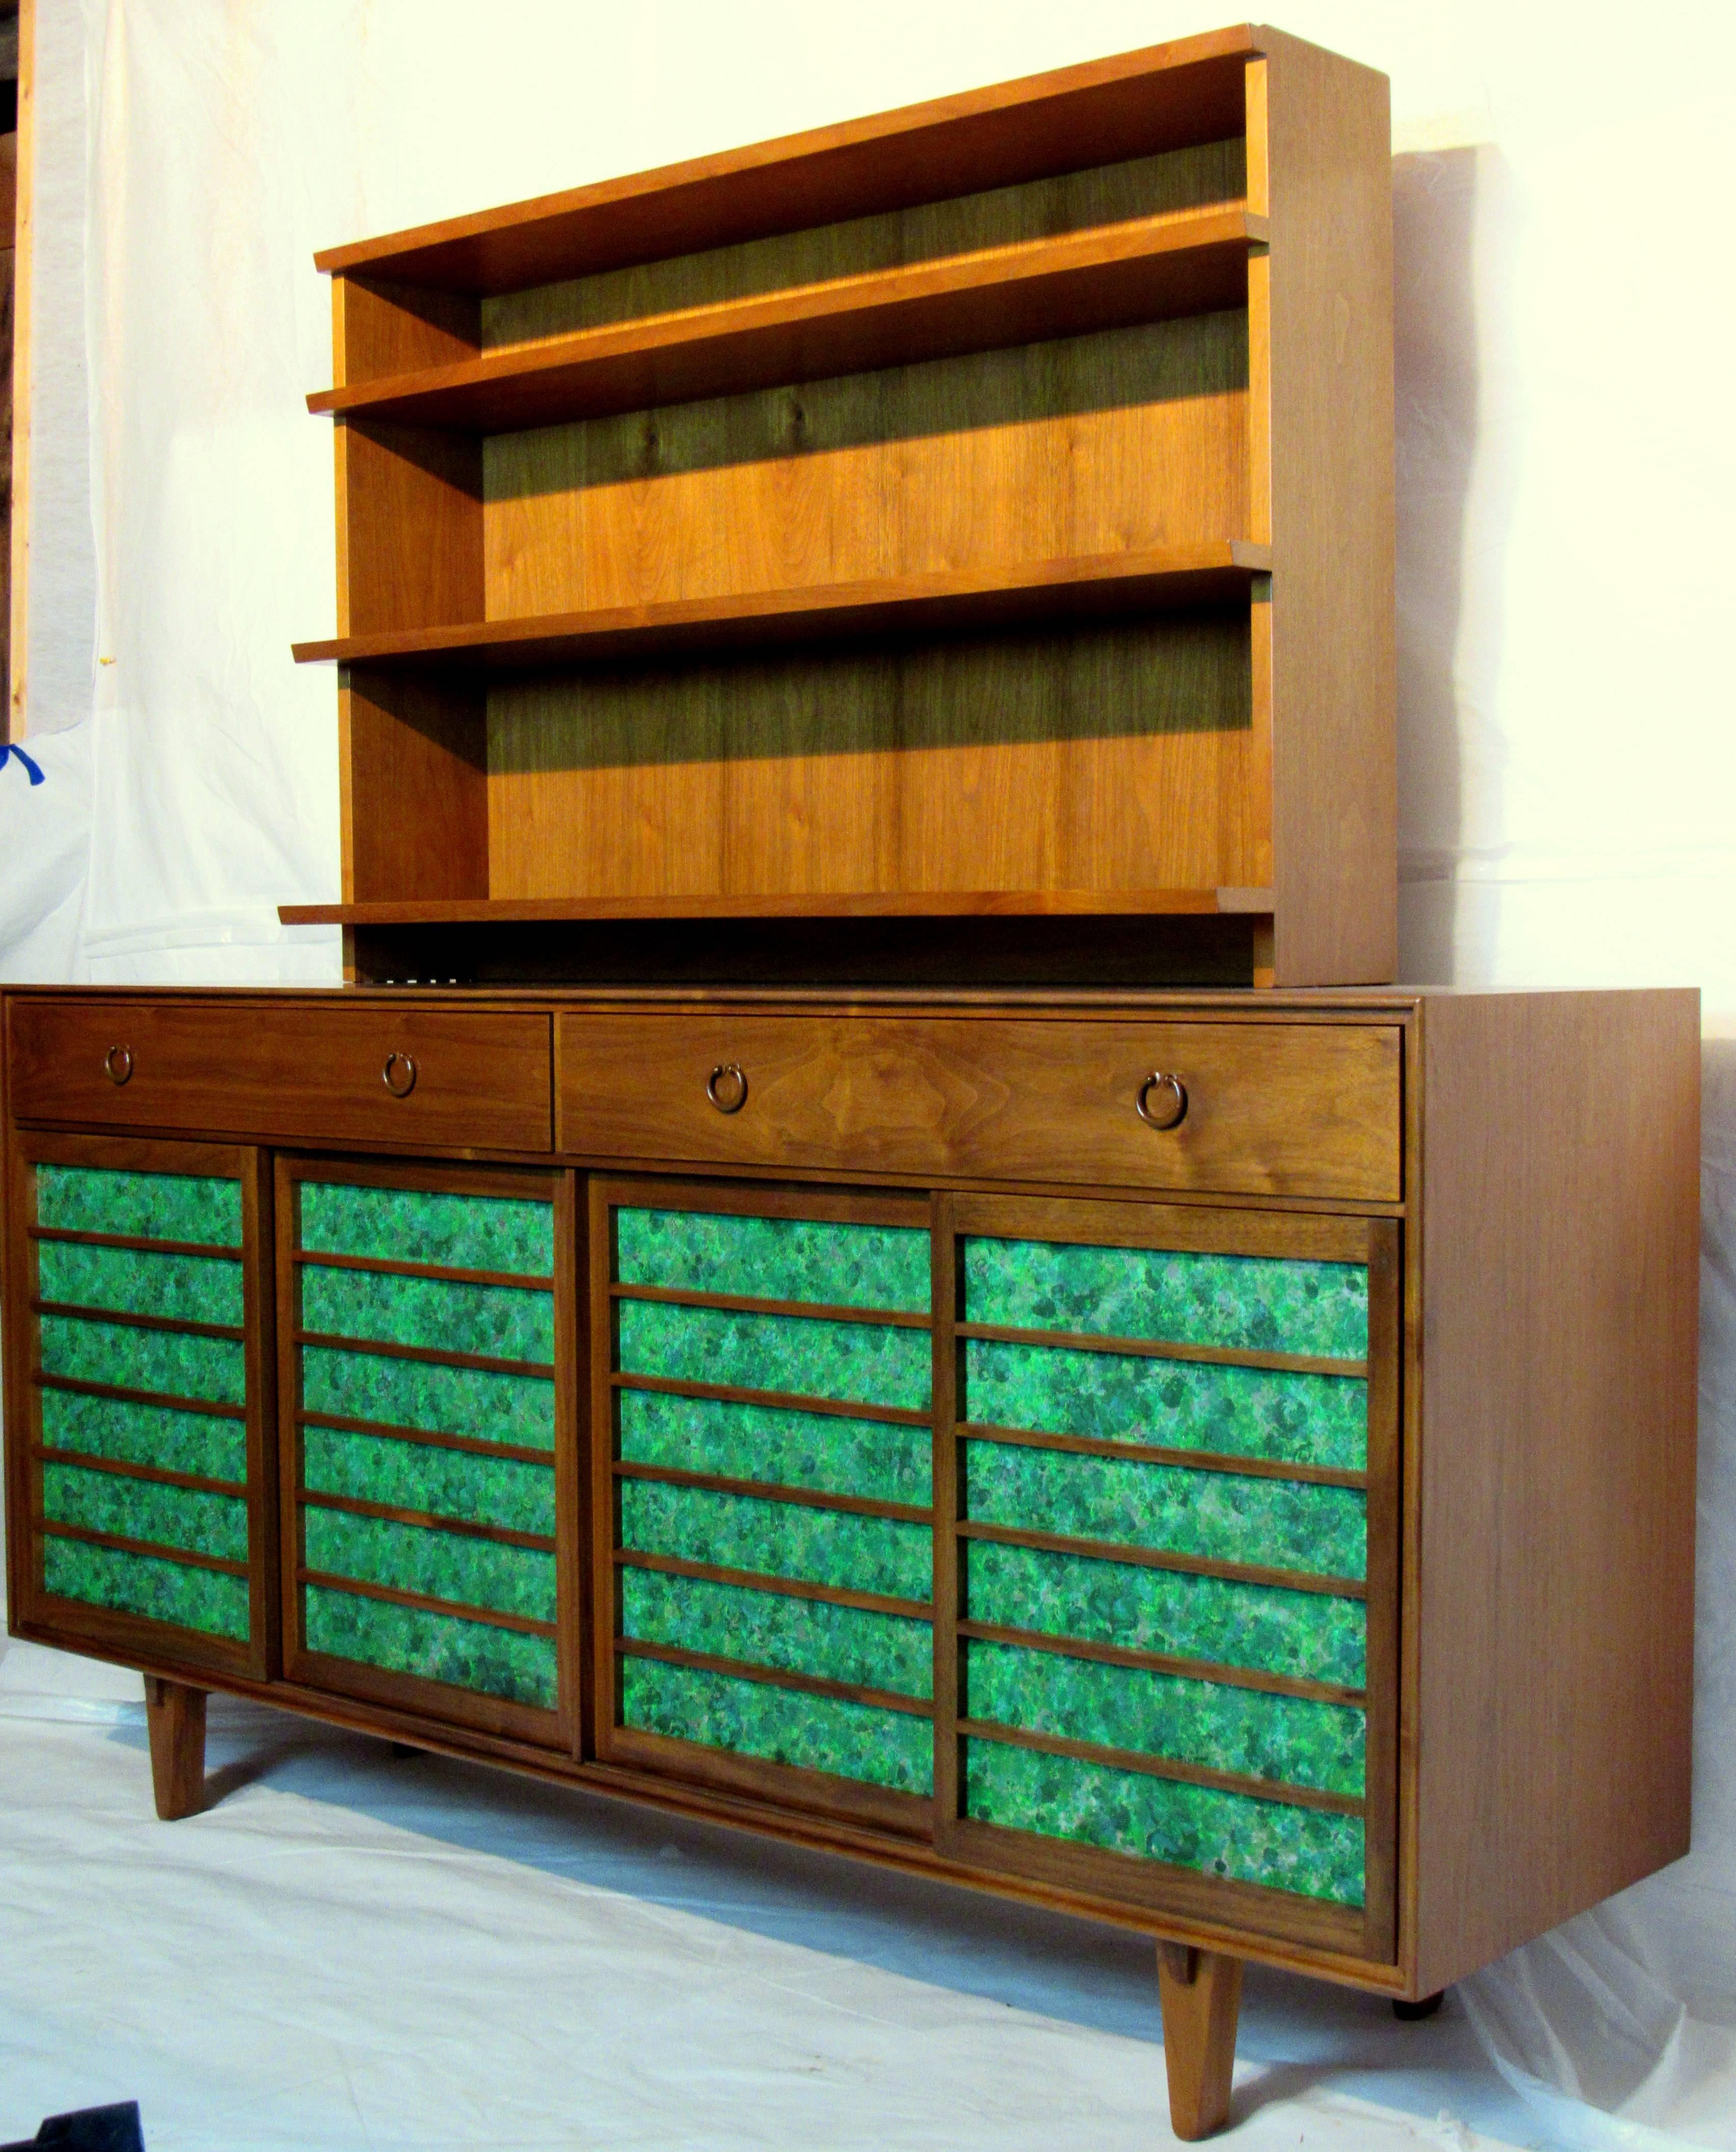 An Edward Wormley walnut and Japanese fir sideboard , model 671A for Dunbar, circa 1953.
A rare exquisite Japanese inspired walnut cabinet with two drawers with cast bronze pulls and featuring four sliding walnut doors with inset panels of oil drop